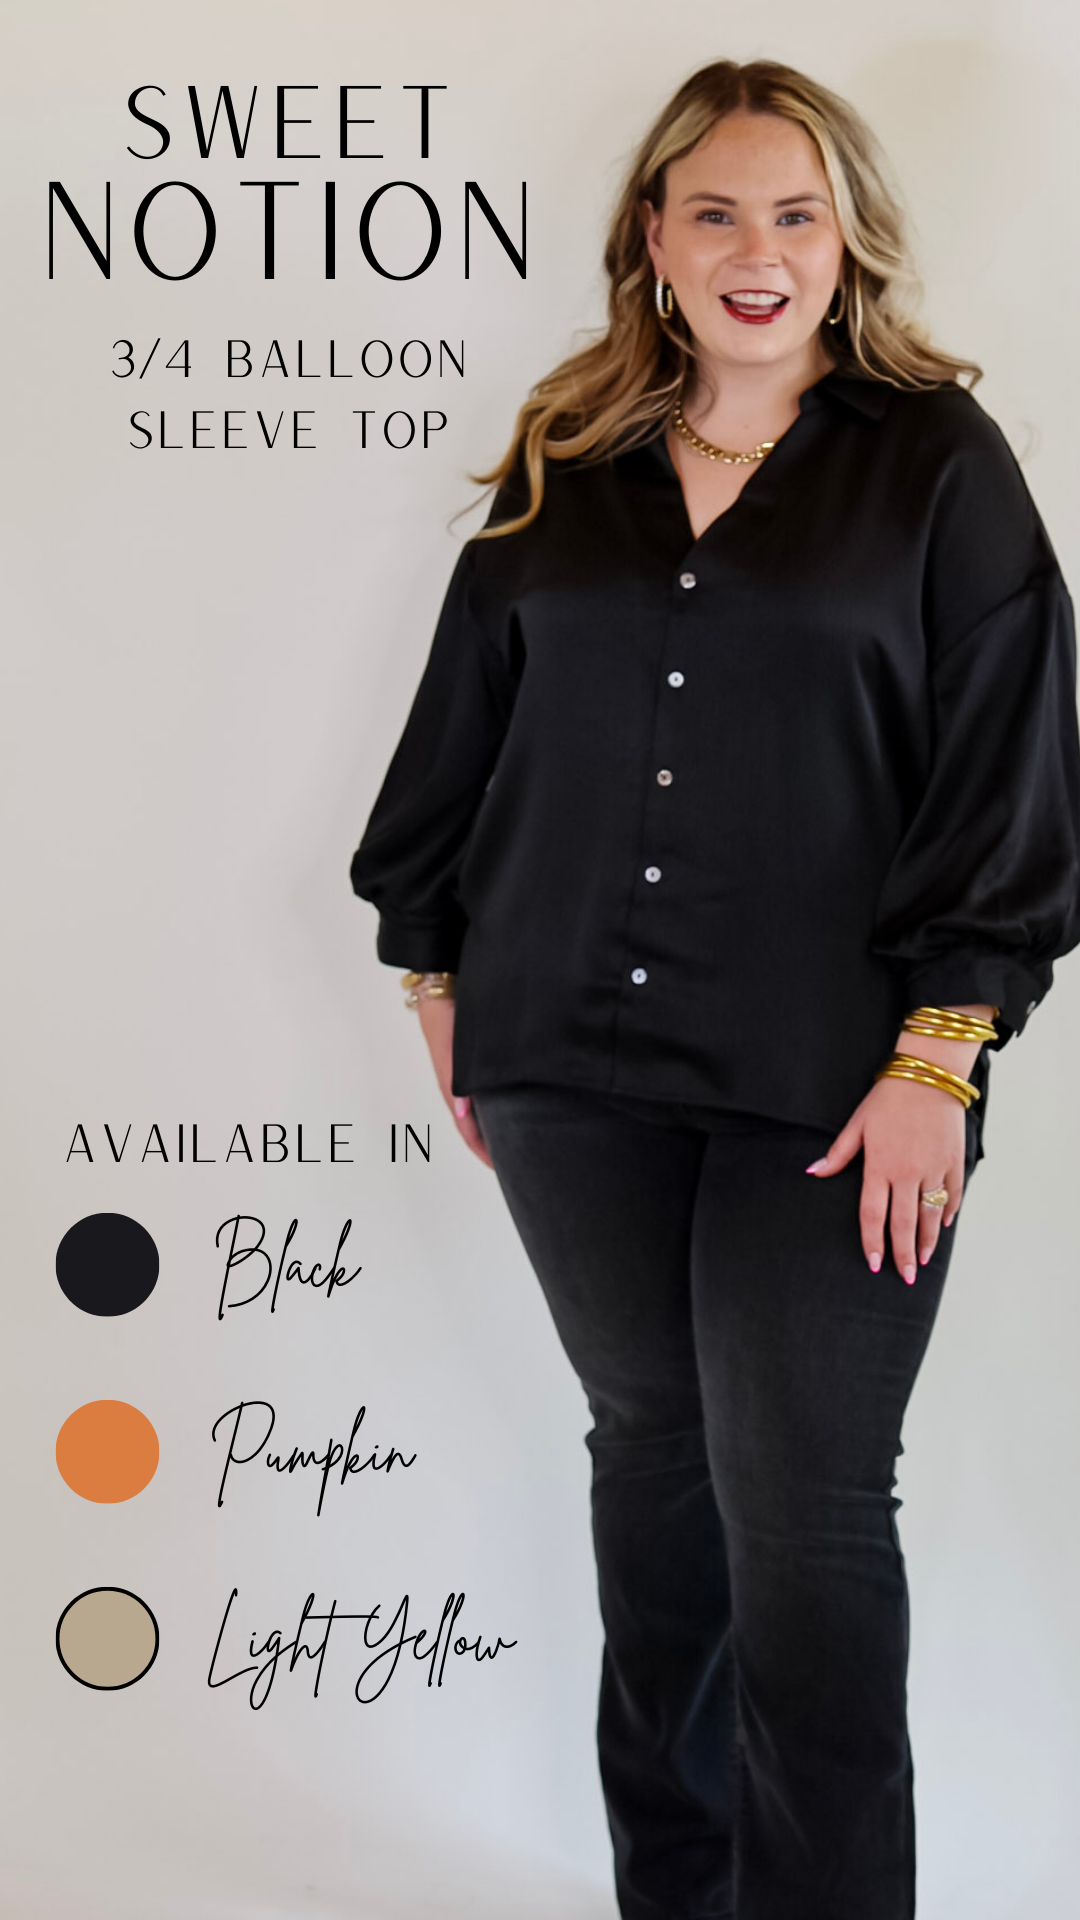 Sweet Notion Button Up 3/4 Balloon Sleeve Top in Black